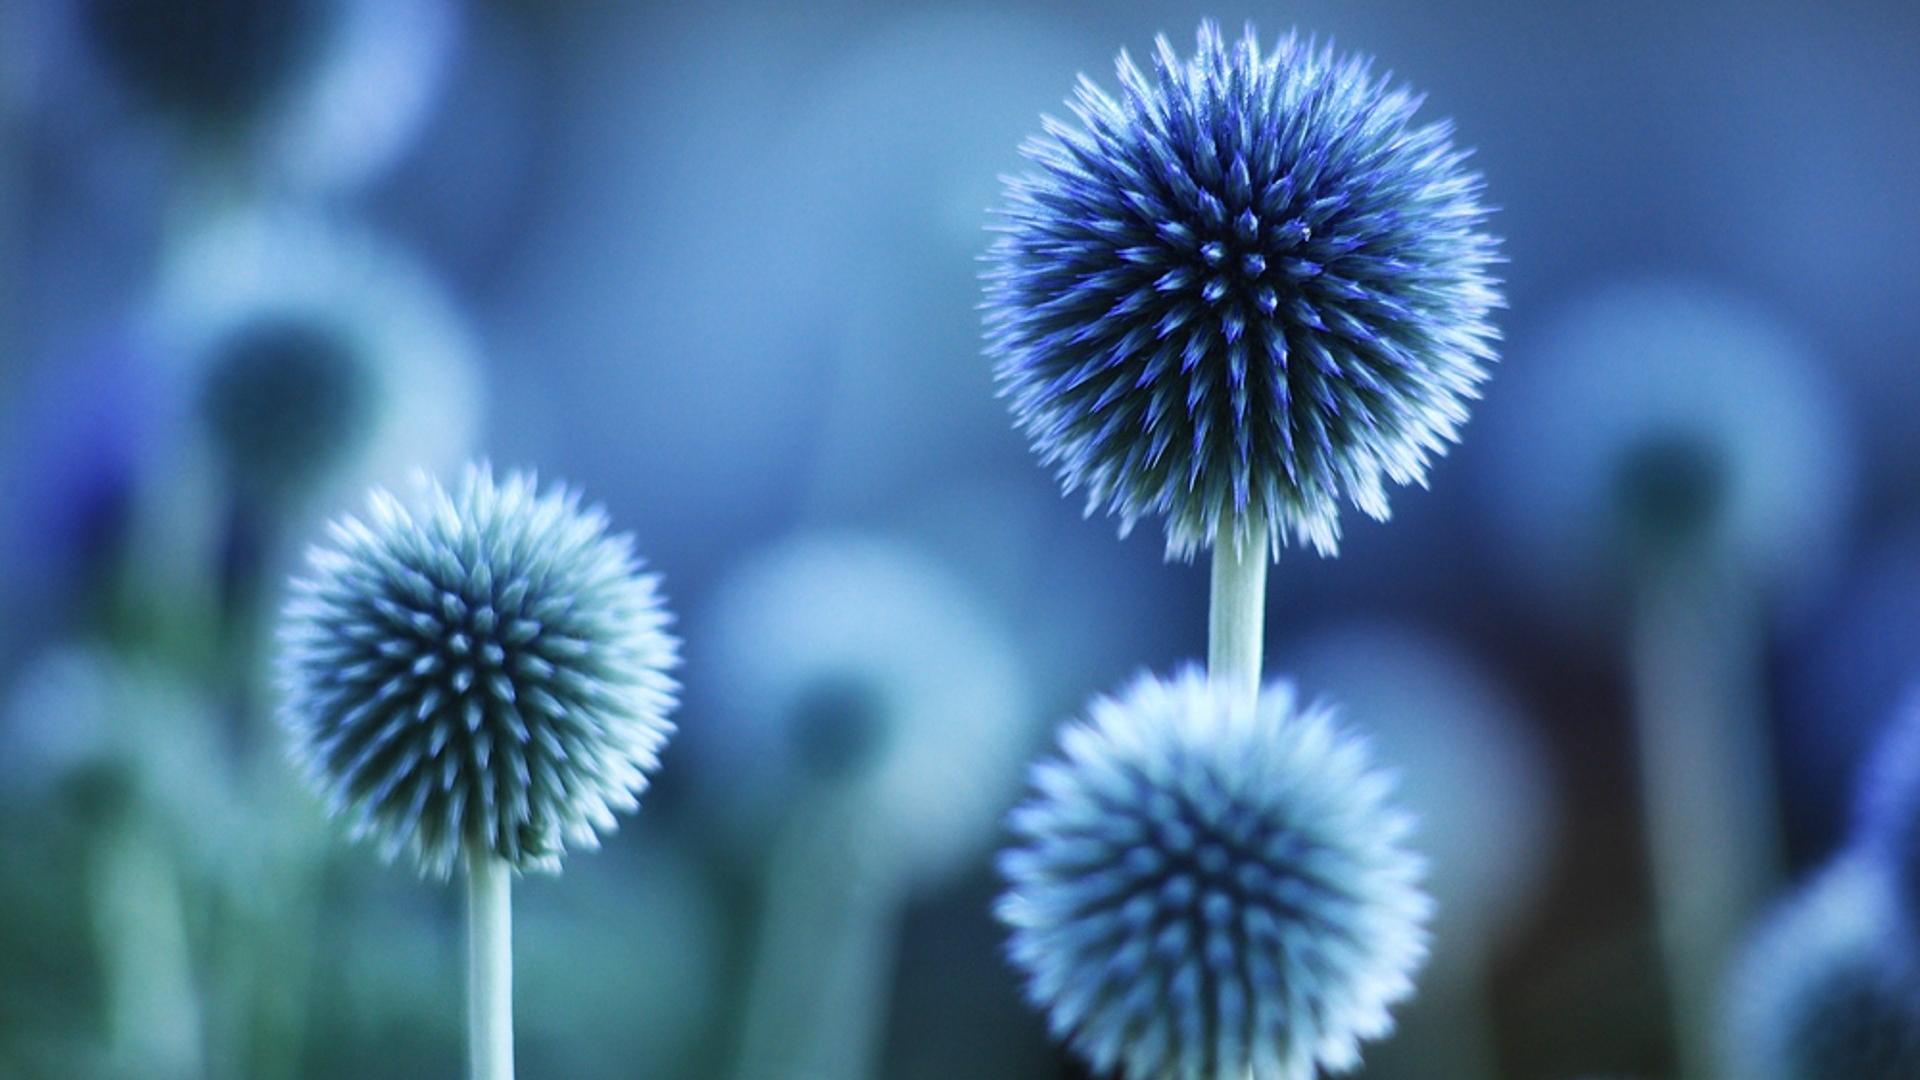 Thistles abstract blue flowers macro wallpaper | (52488)